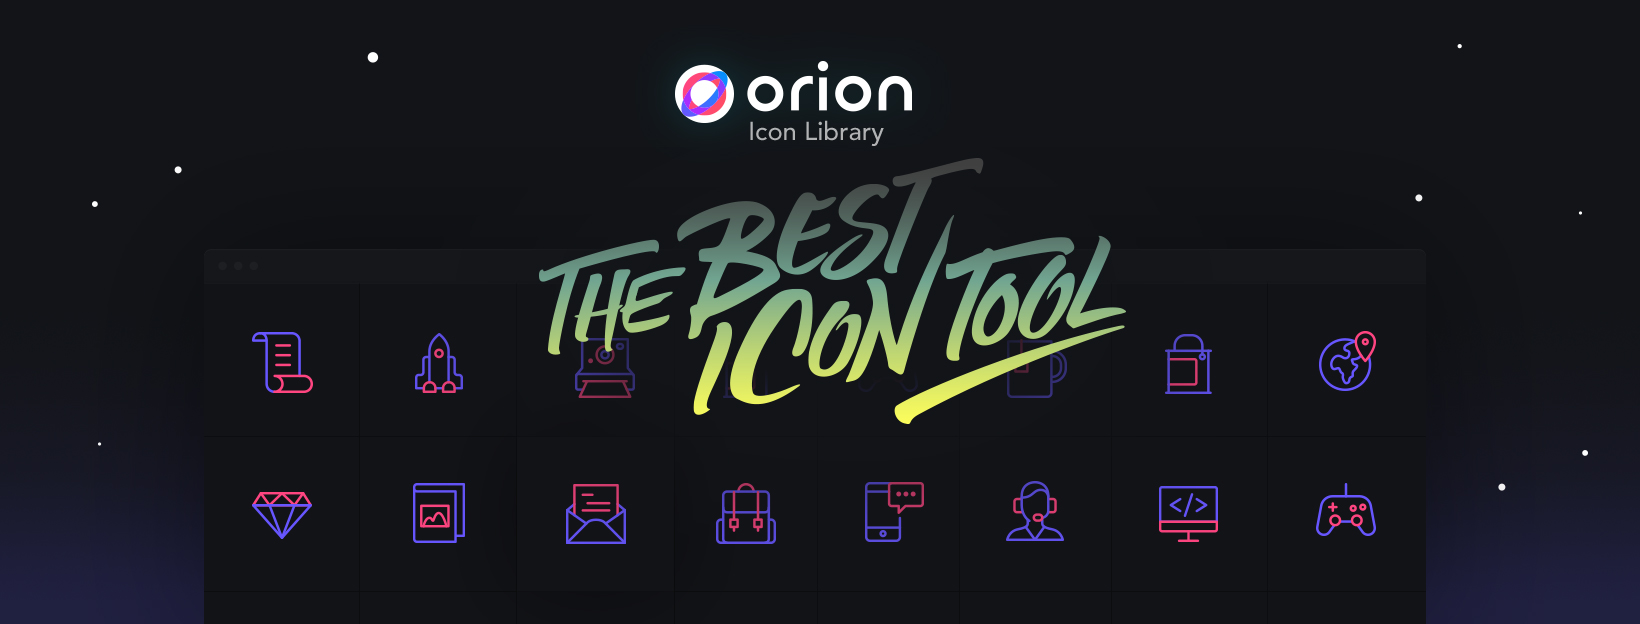 Orion - 6014 Free SVG Vector Icons